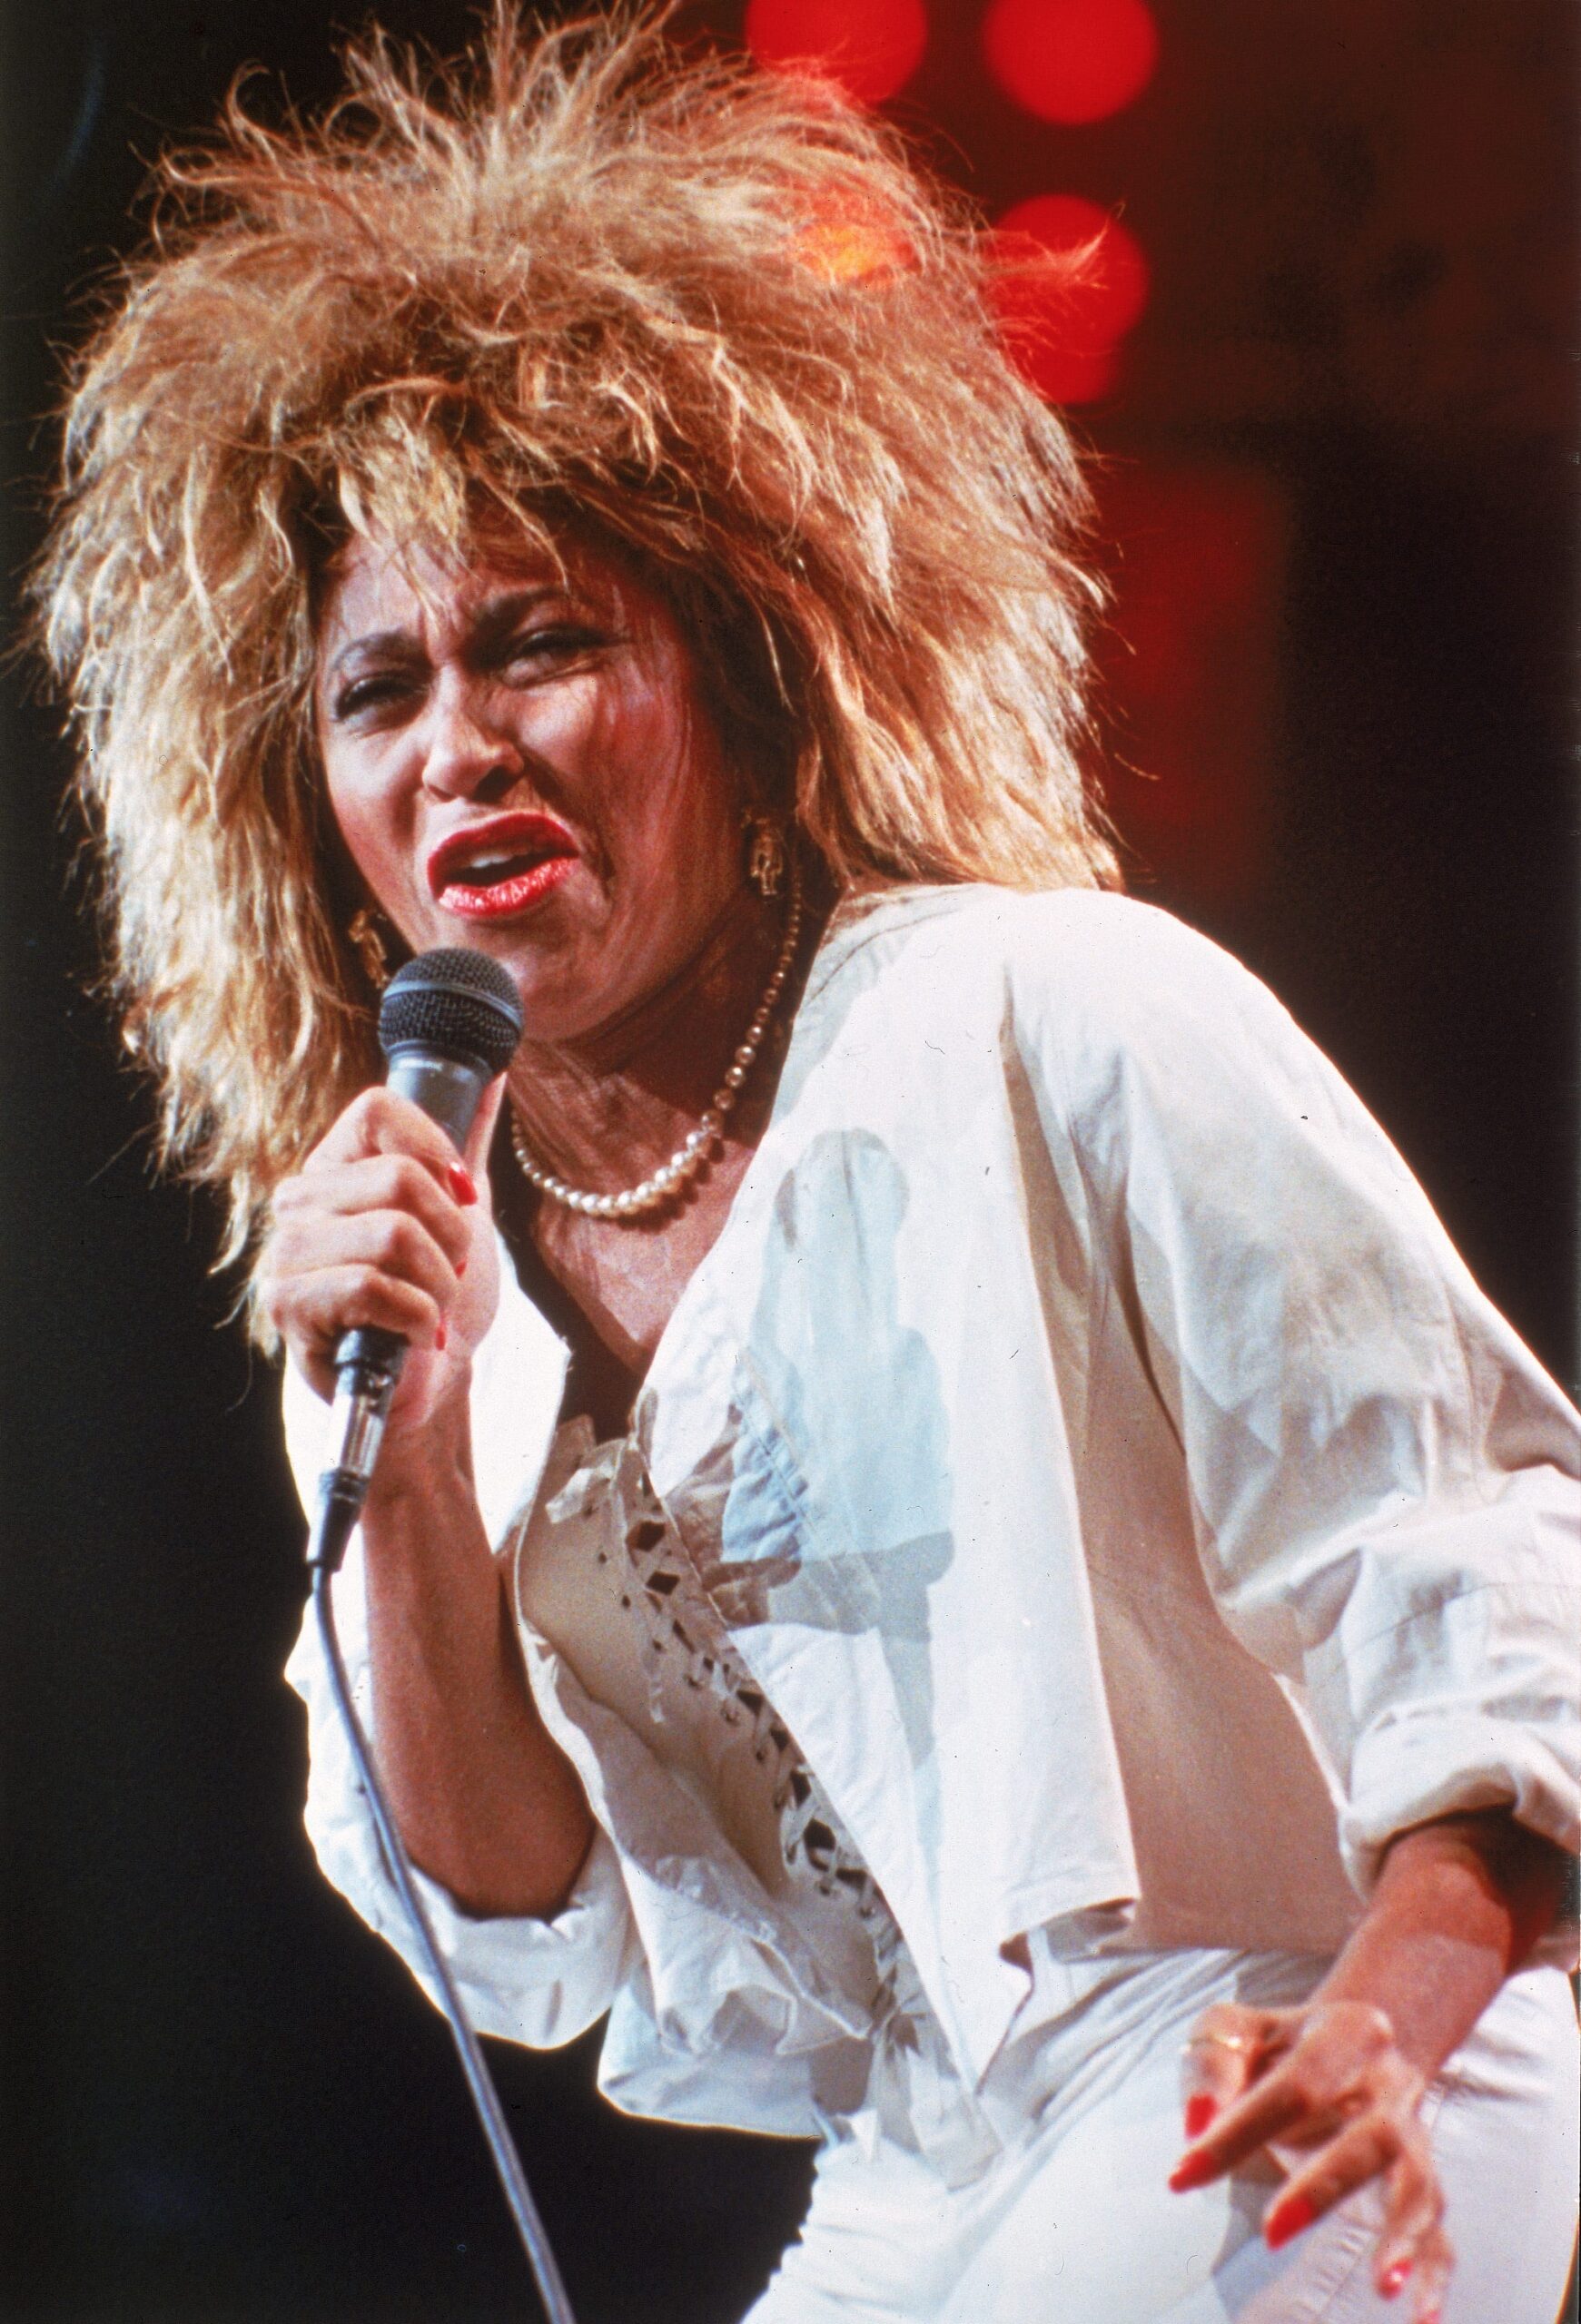 Tina Turner sings at Madison Square Garden in New York City on Aug. 1, 1985.